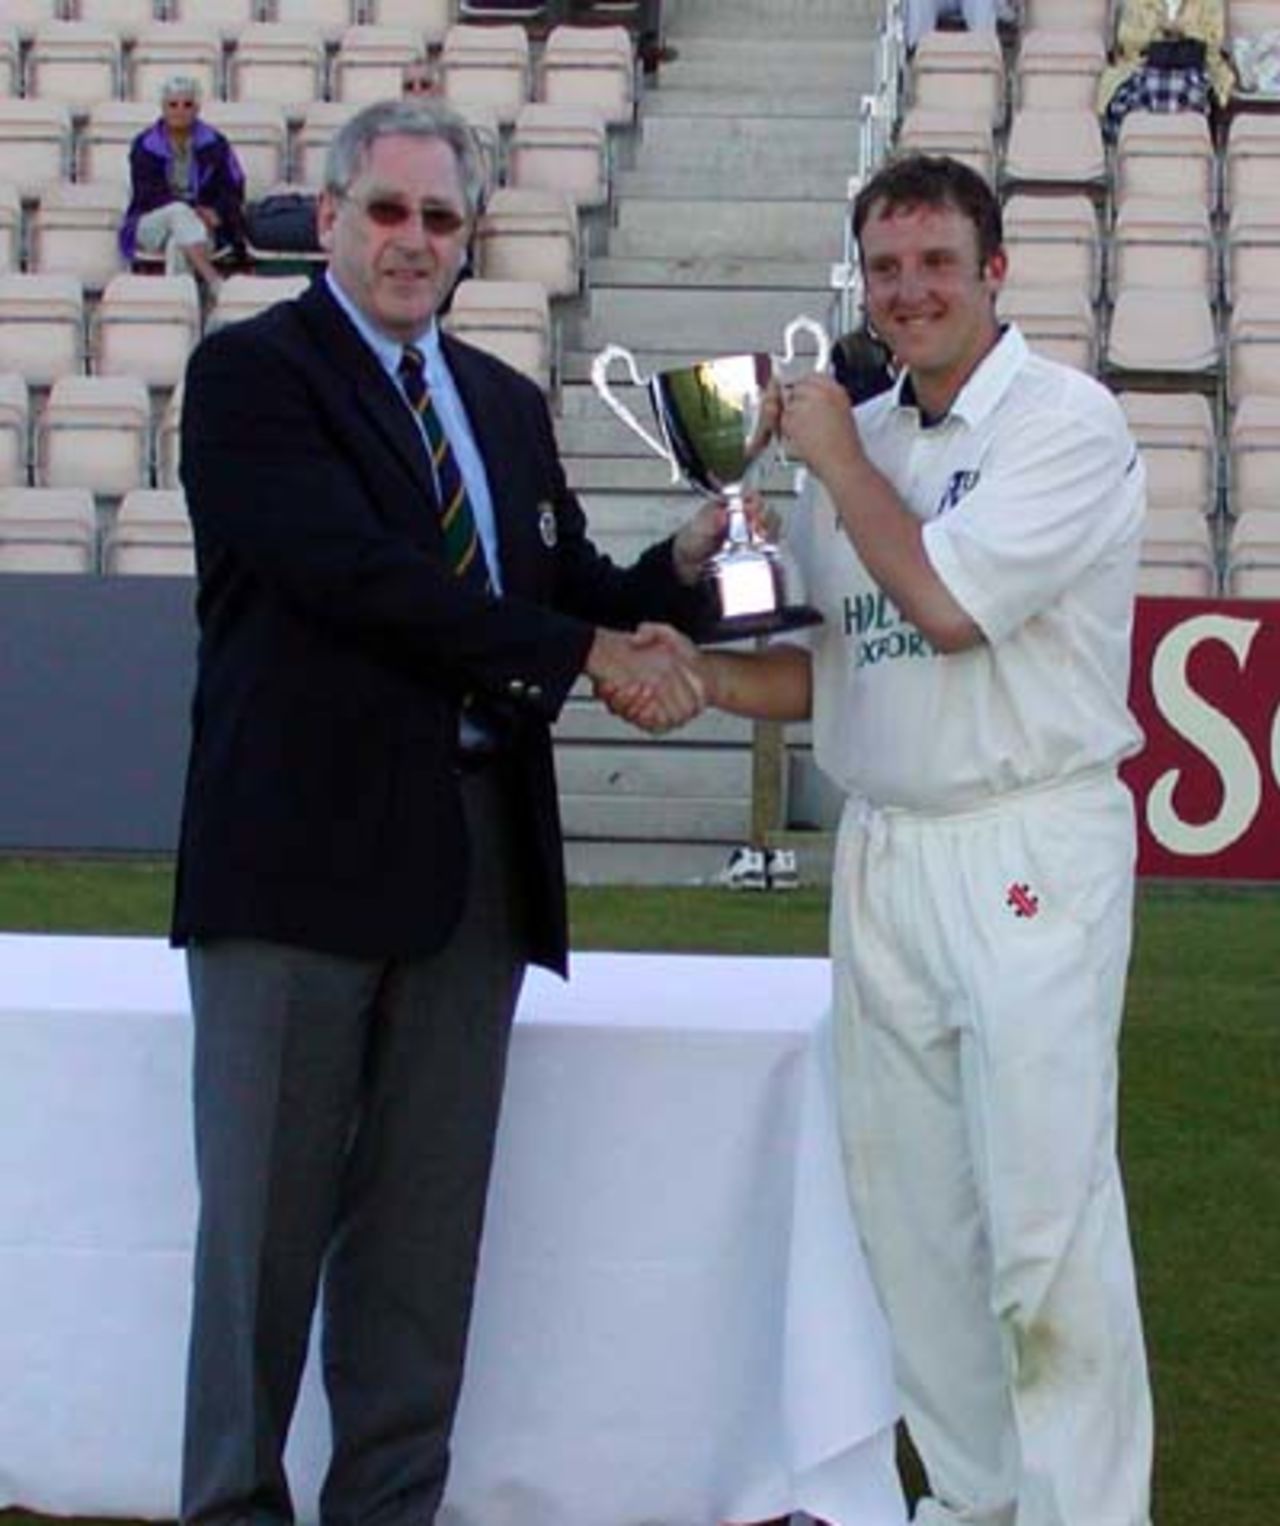 James Tredwell receives the ECB 2ndXI Trophy from Hampshire chairman Rod Bransgrove